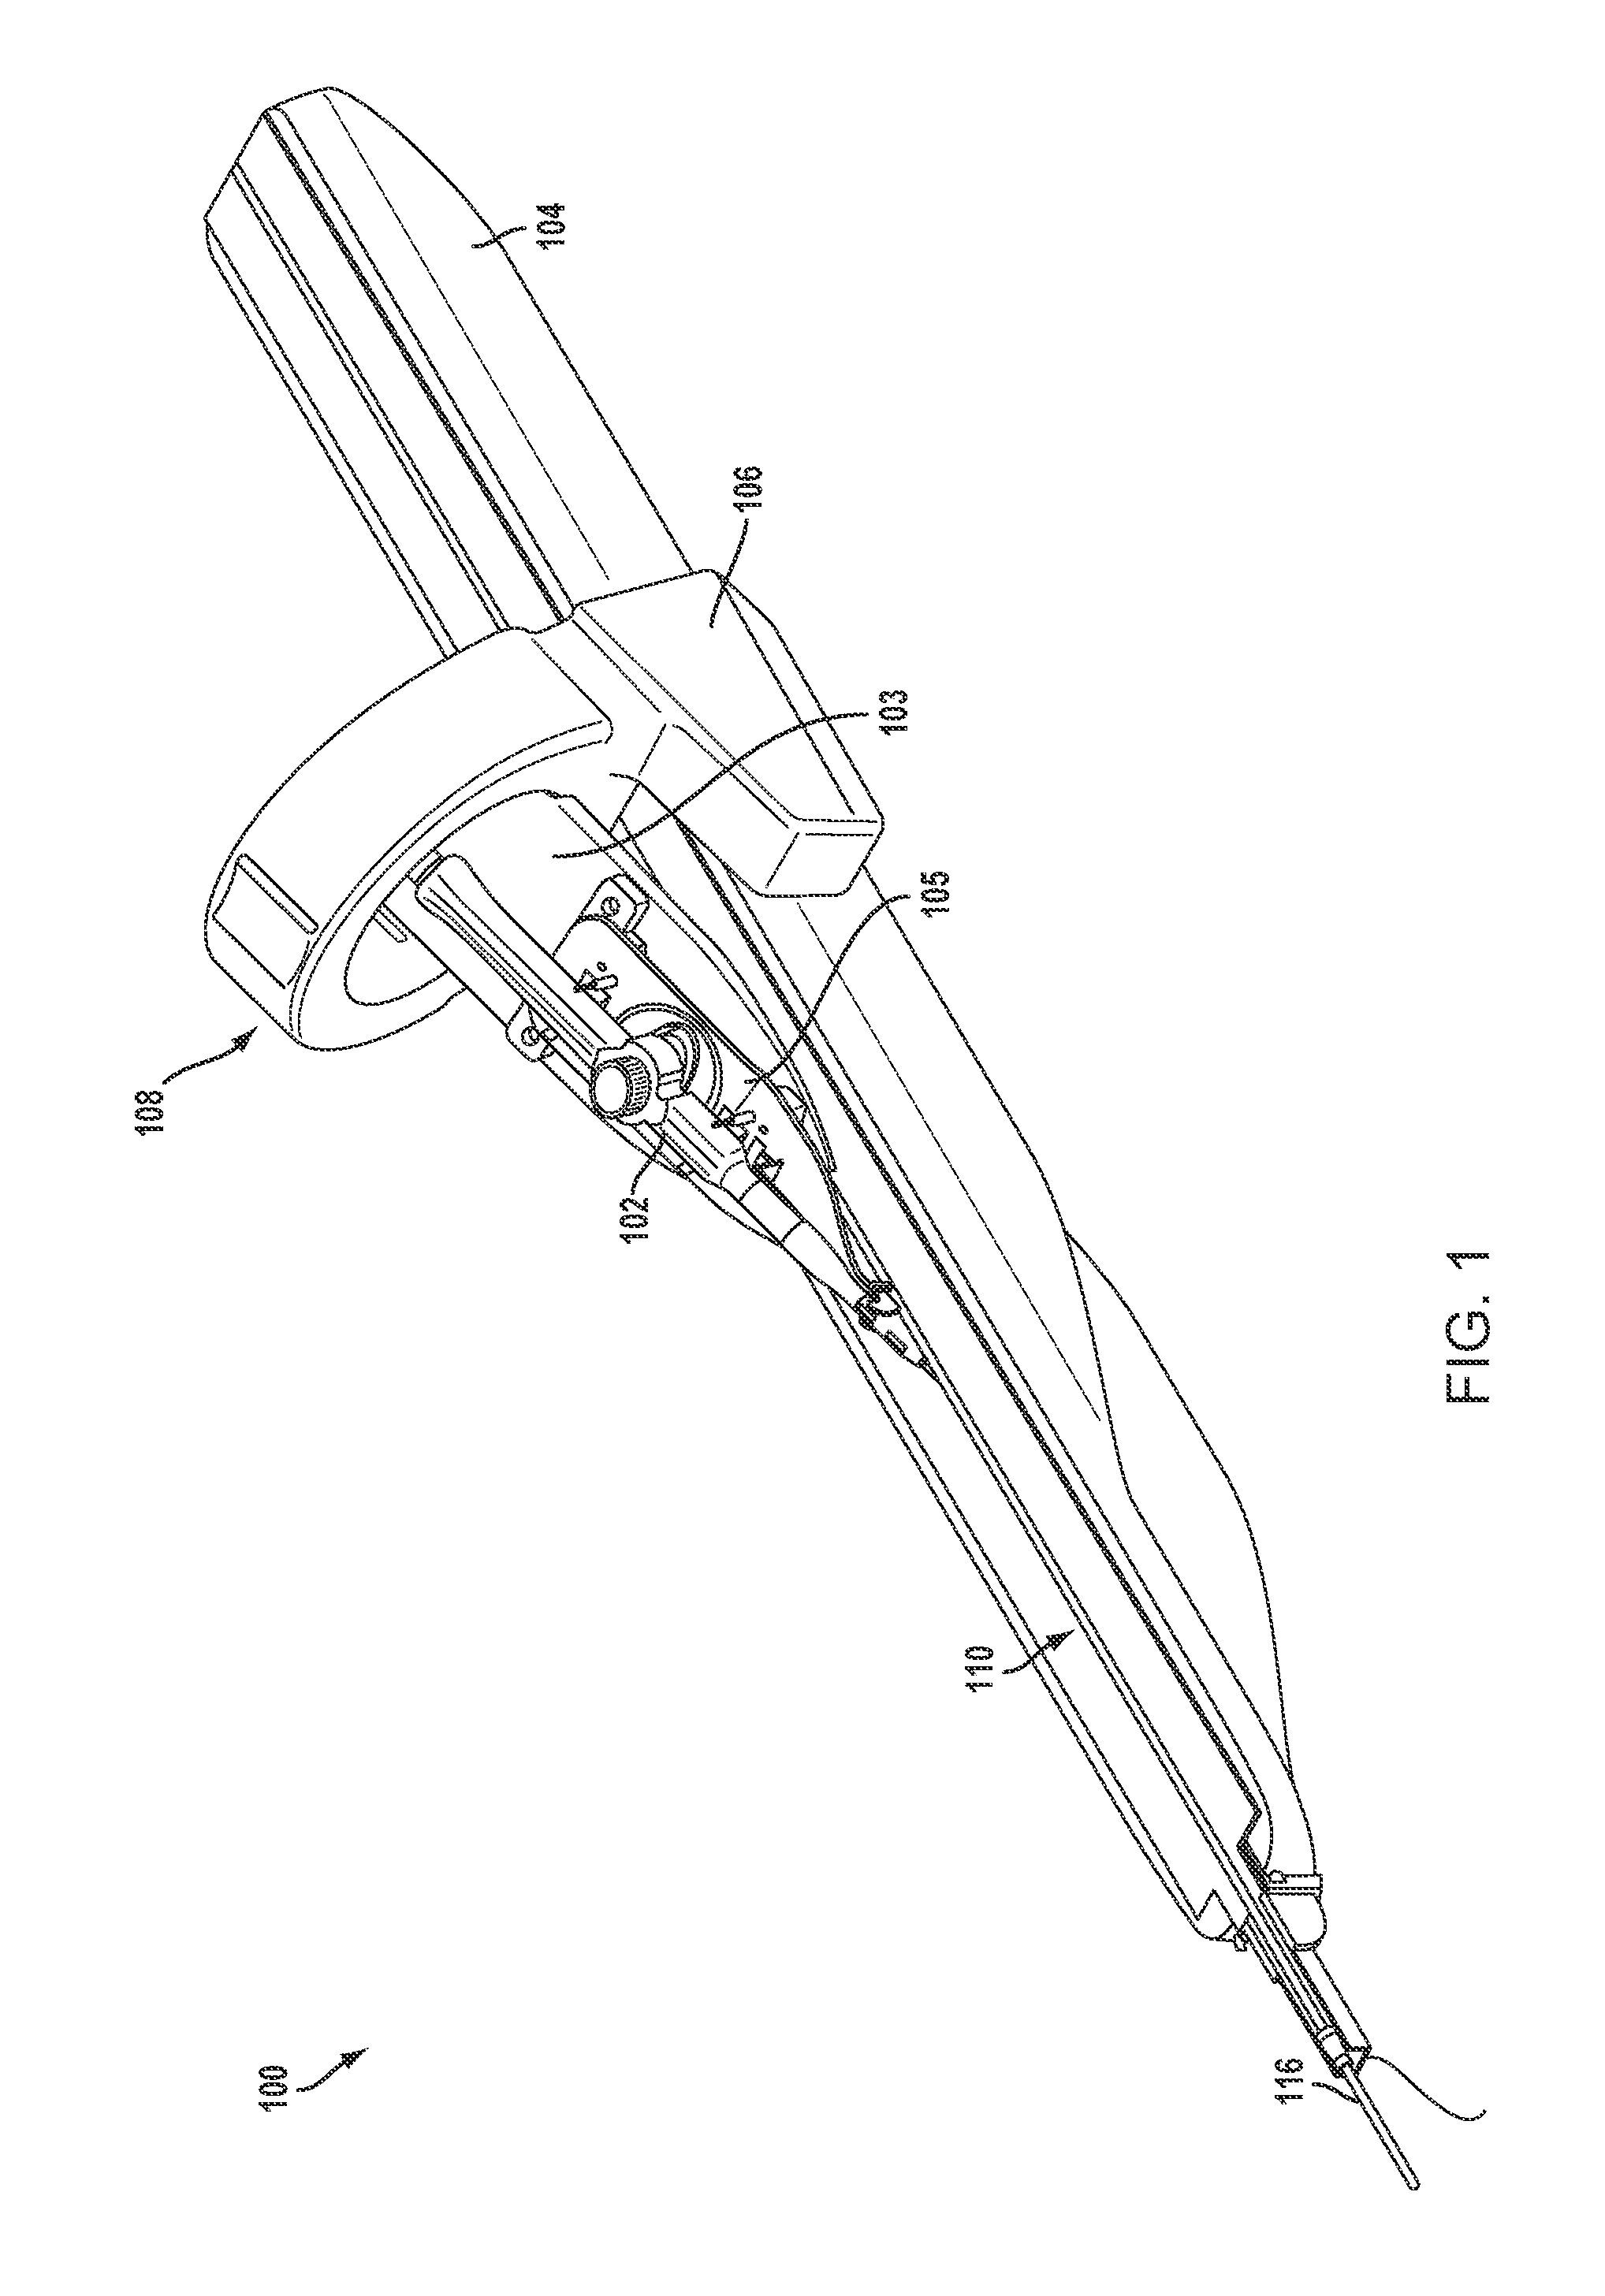 Remote Catheter Positioning System with Hoop Drive Assembly